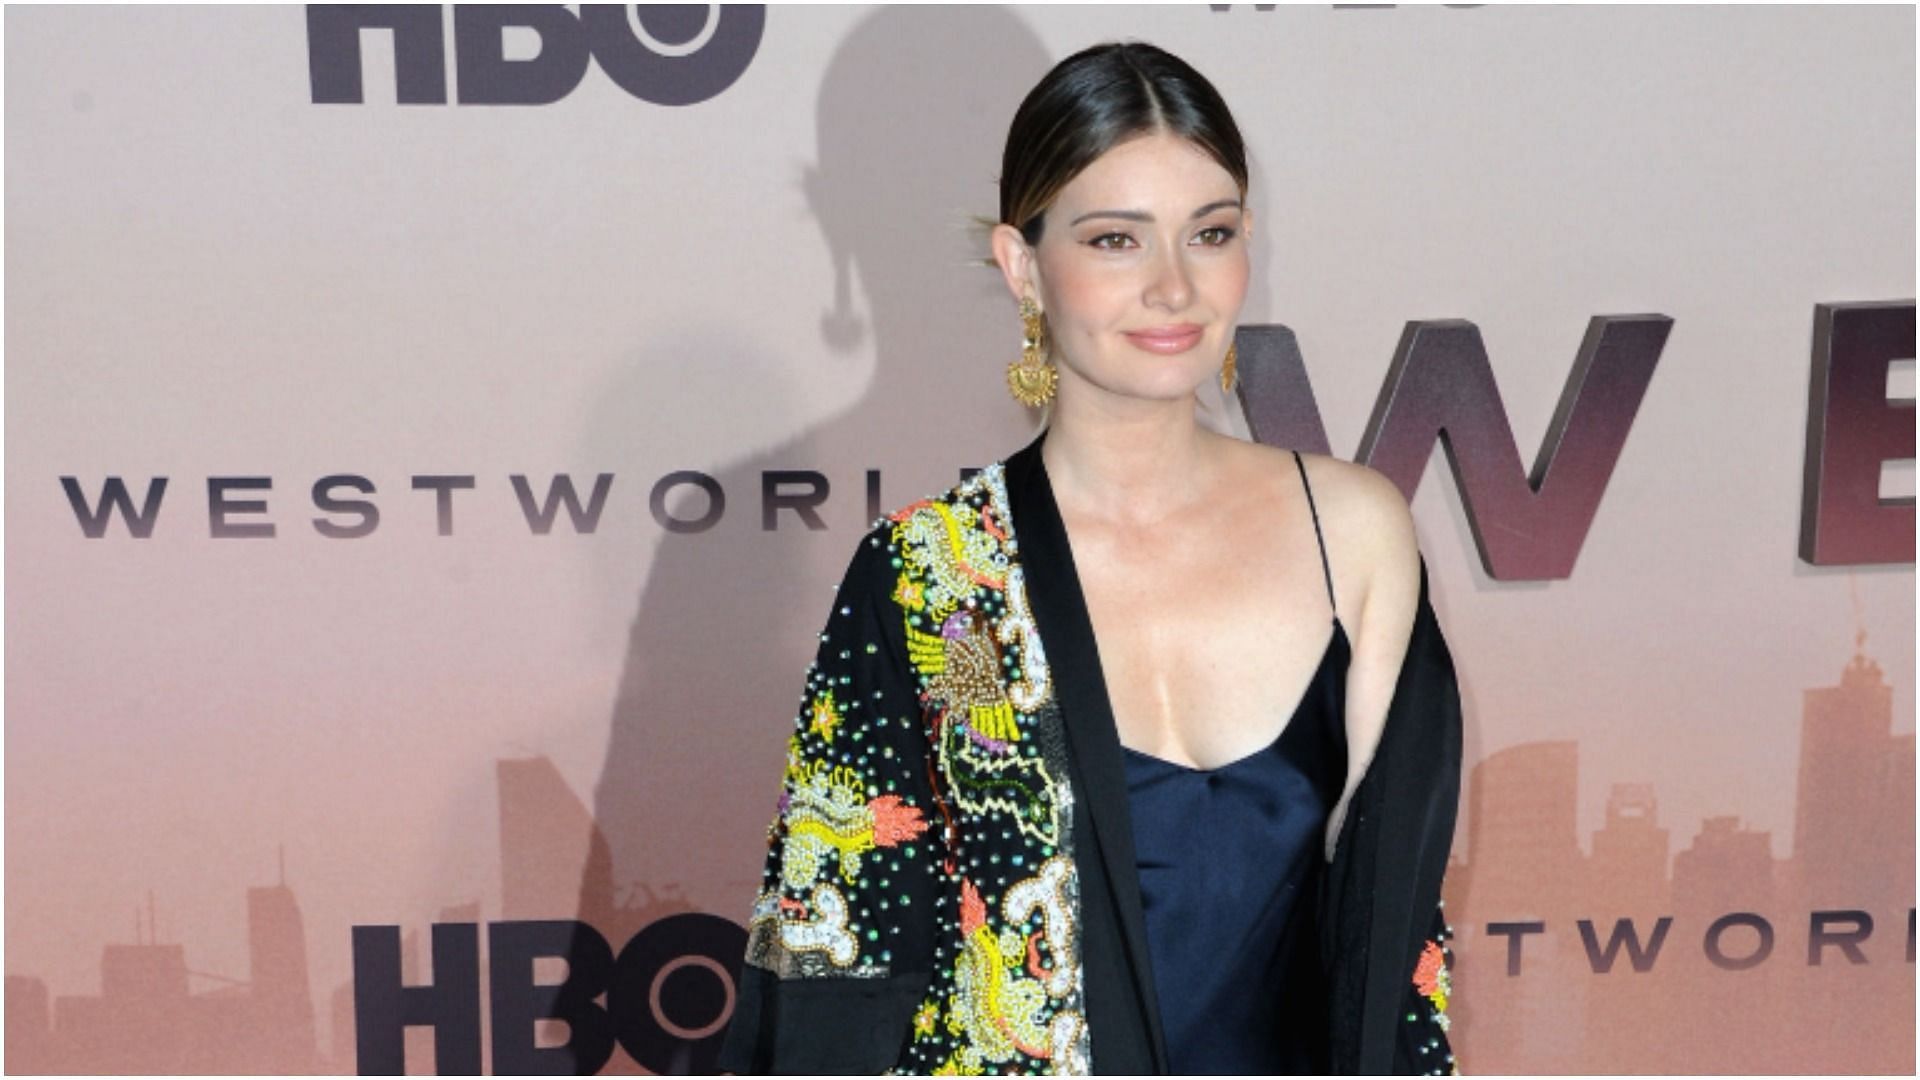 Lauren Parsekian arrives for the Premiere Of HBO&#039;s &#039;Westworld&#039; Season 3 held at TCL Chinese Theatre (Image by Albert L. Ortega via Getty Images)